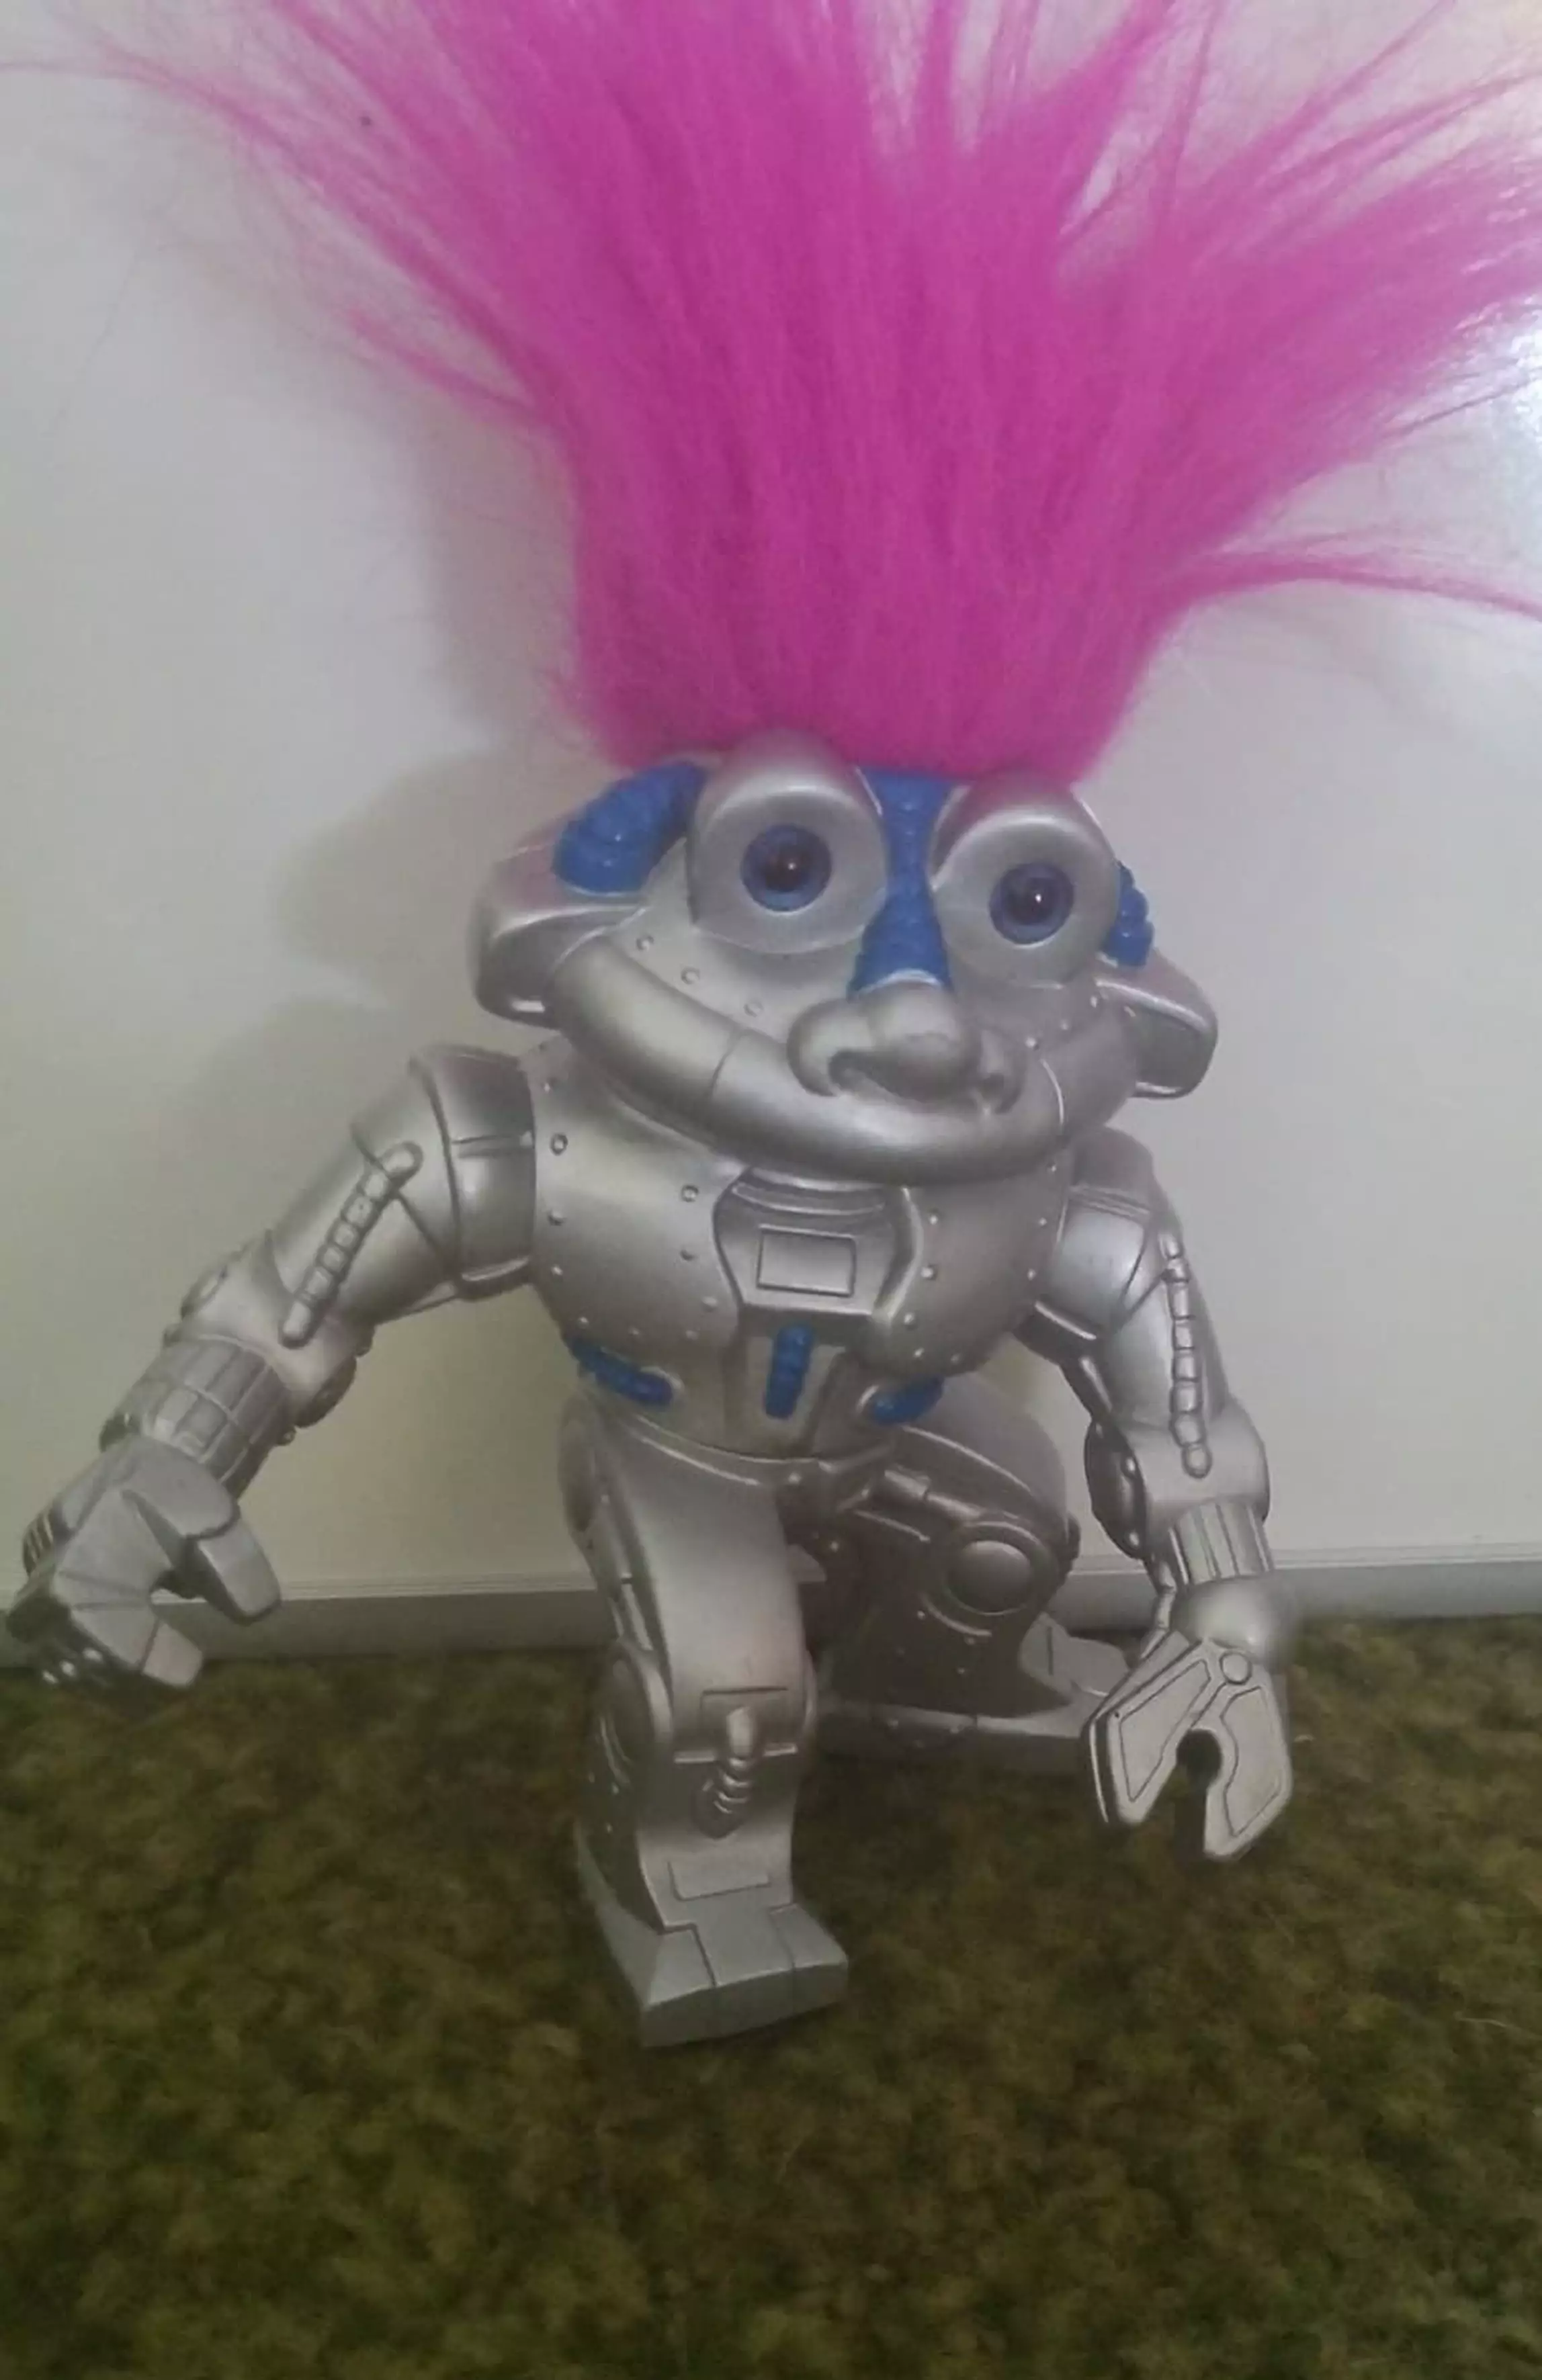 The RoboTroll with 'popping' pink hair.